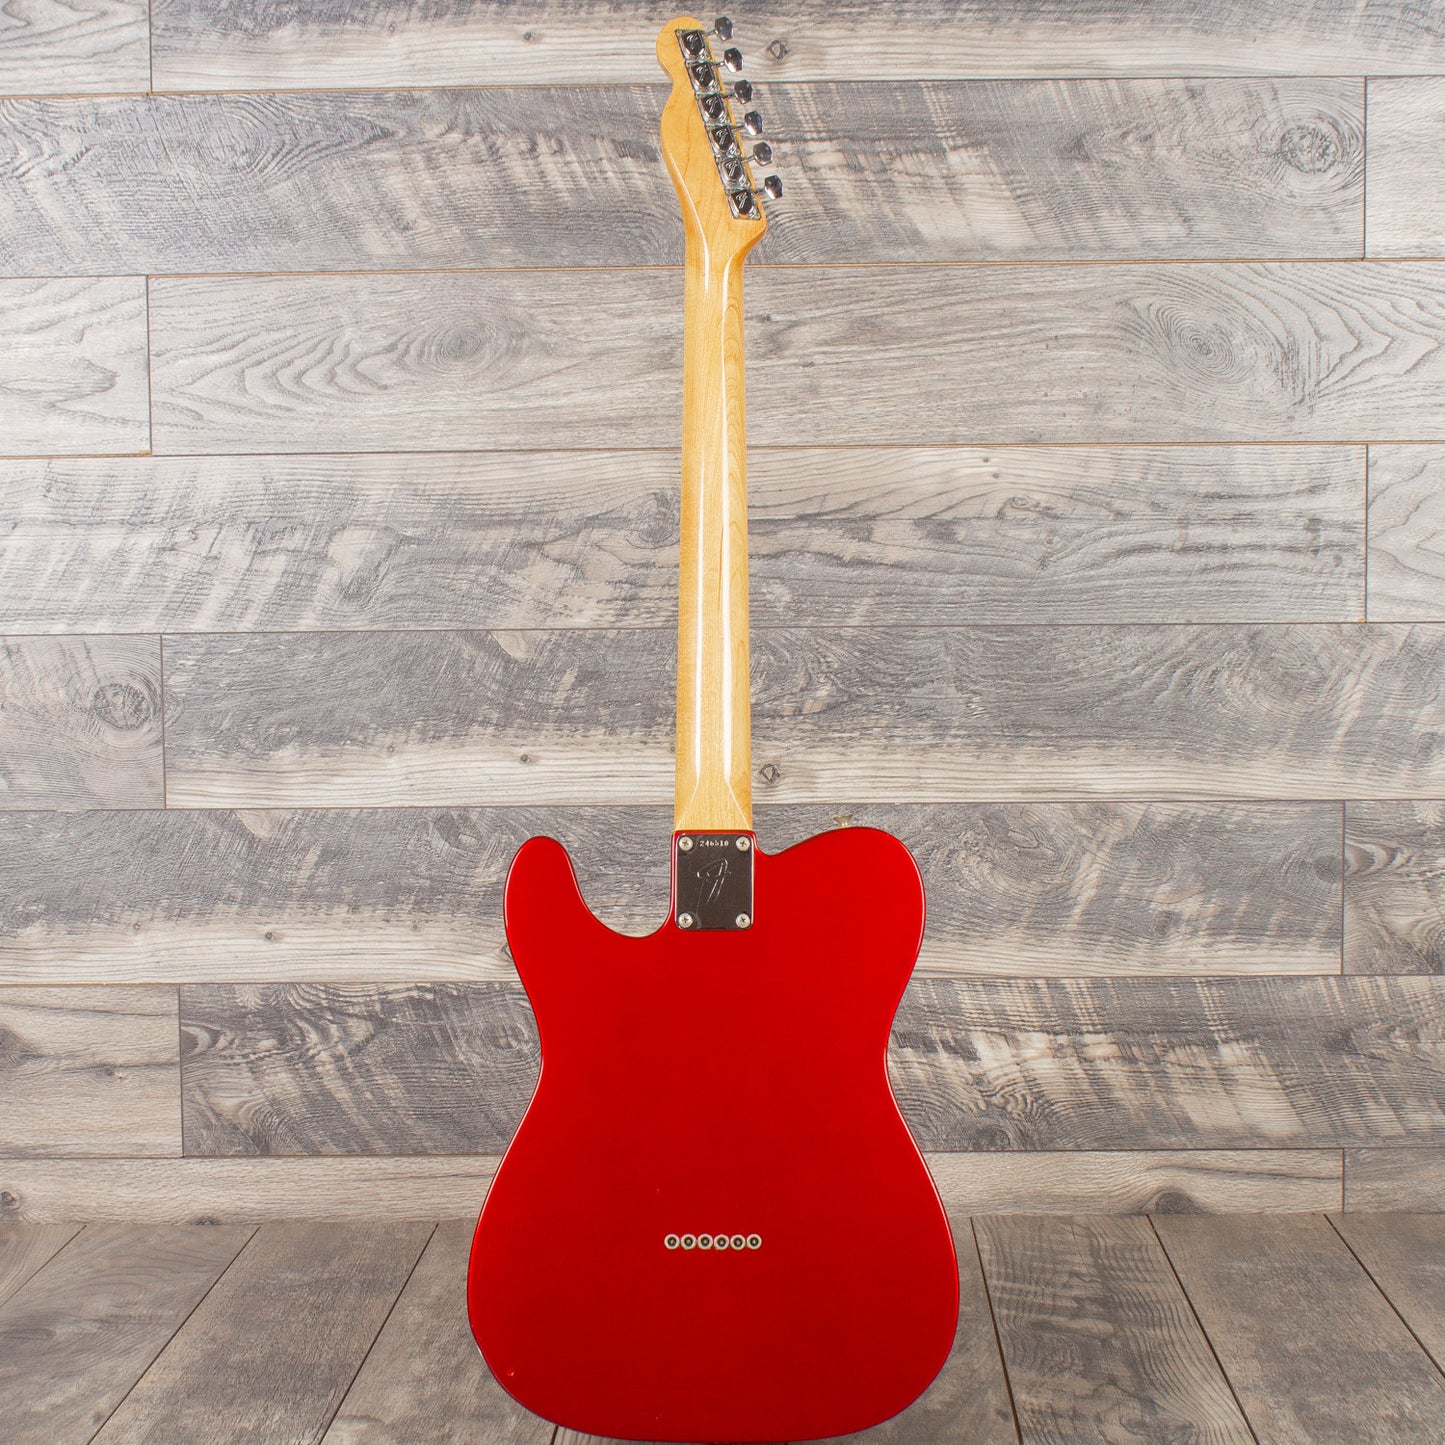 1968 Fender Telecaster - Candy Apple Red